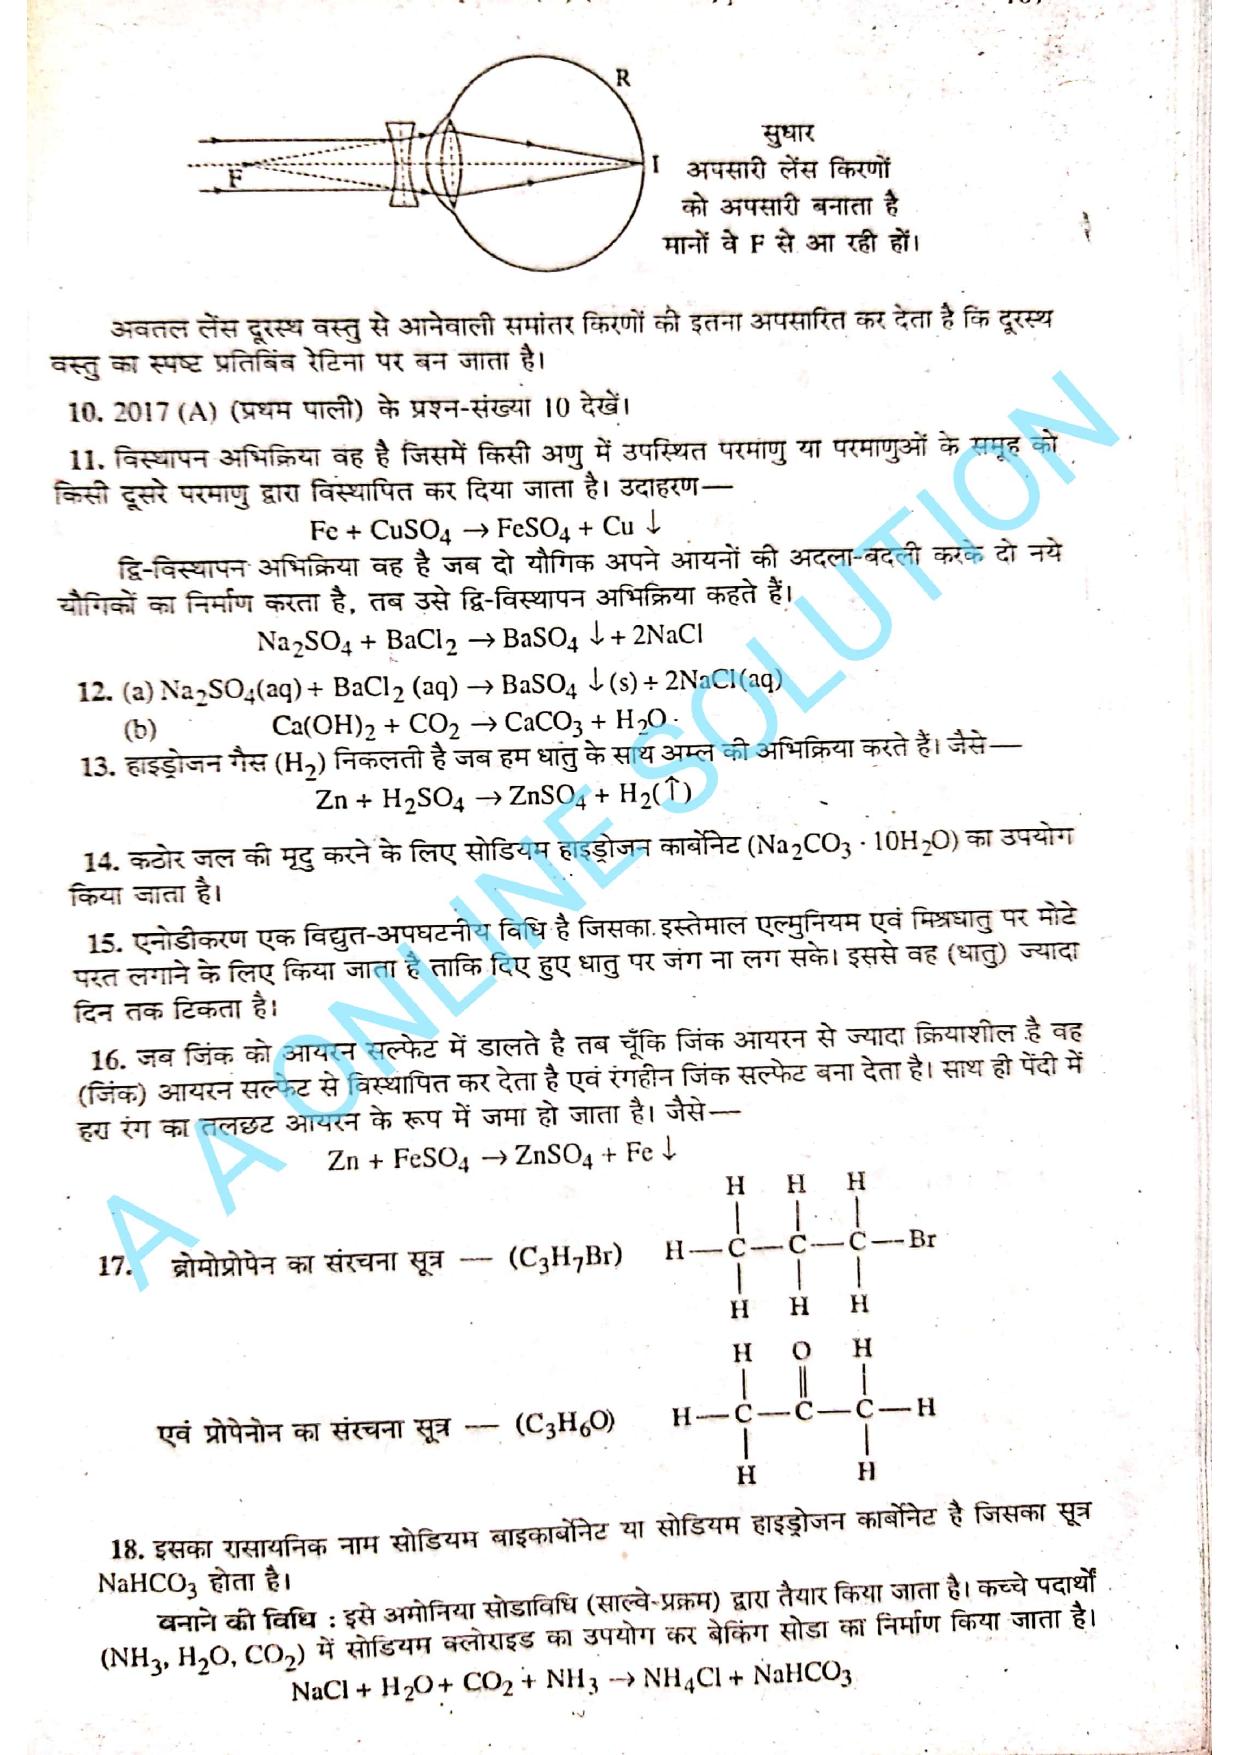 Bihar Board Class 10 Science 2020 (1st Sitting) Question Paper - Page 7